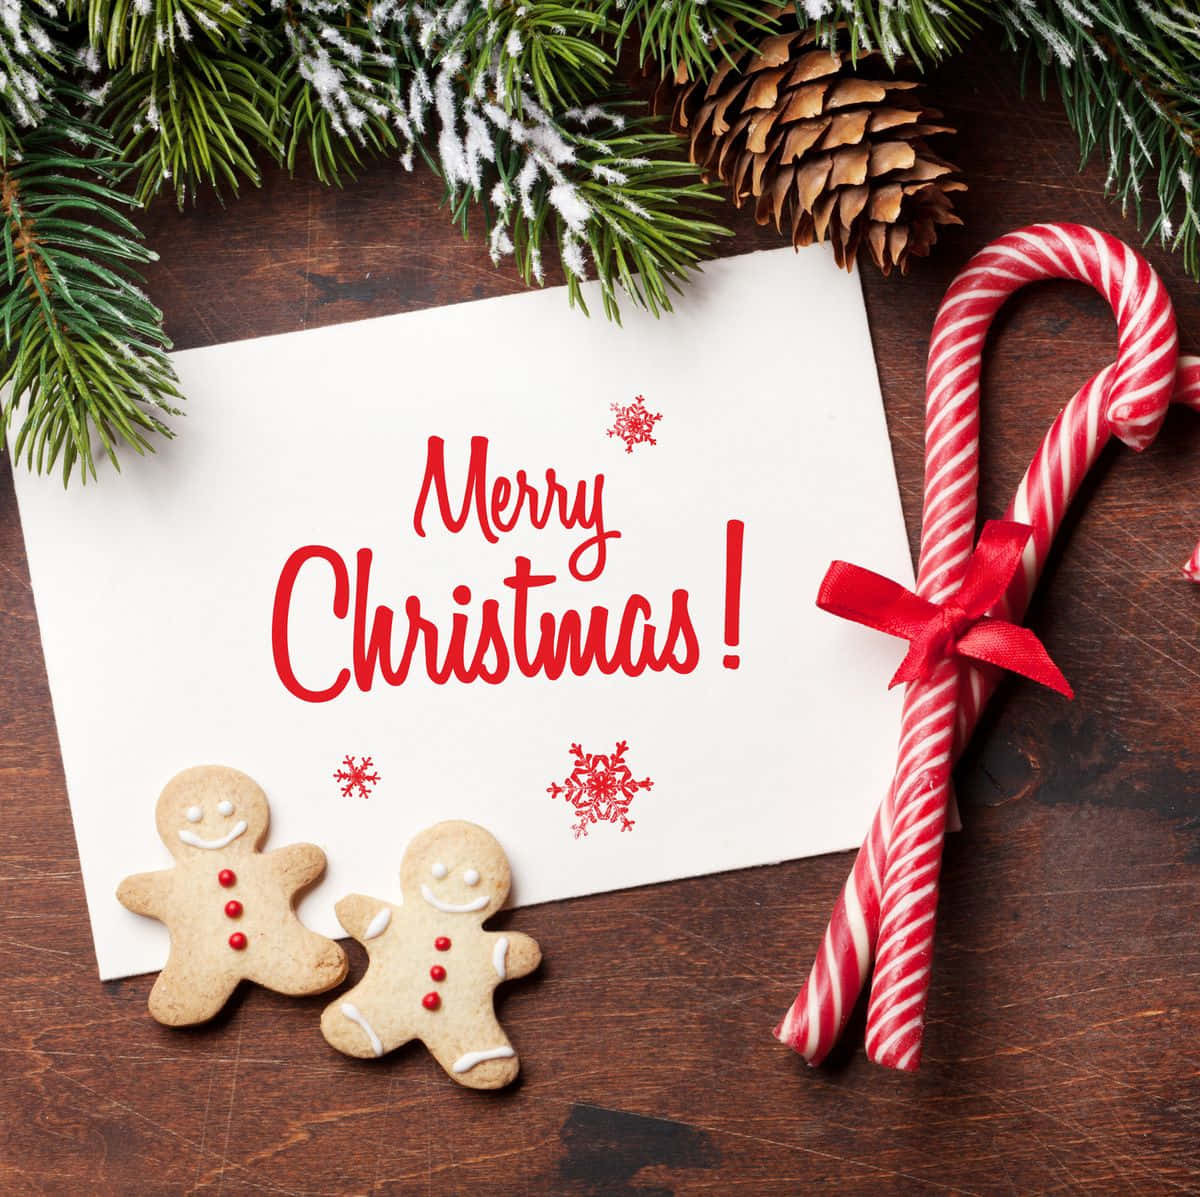 Merry Christmas Card With Gingerbread Cookies And Candy Canes On A Wooden Table